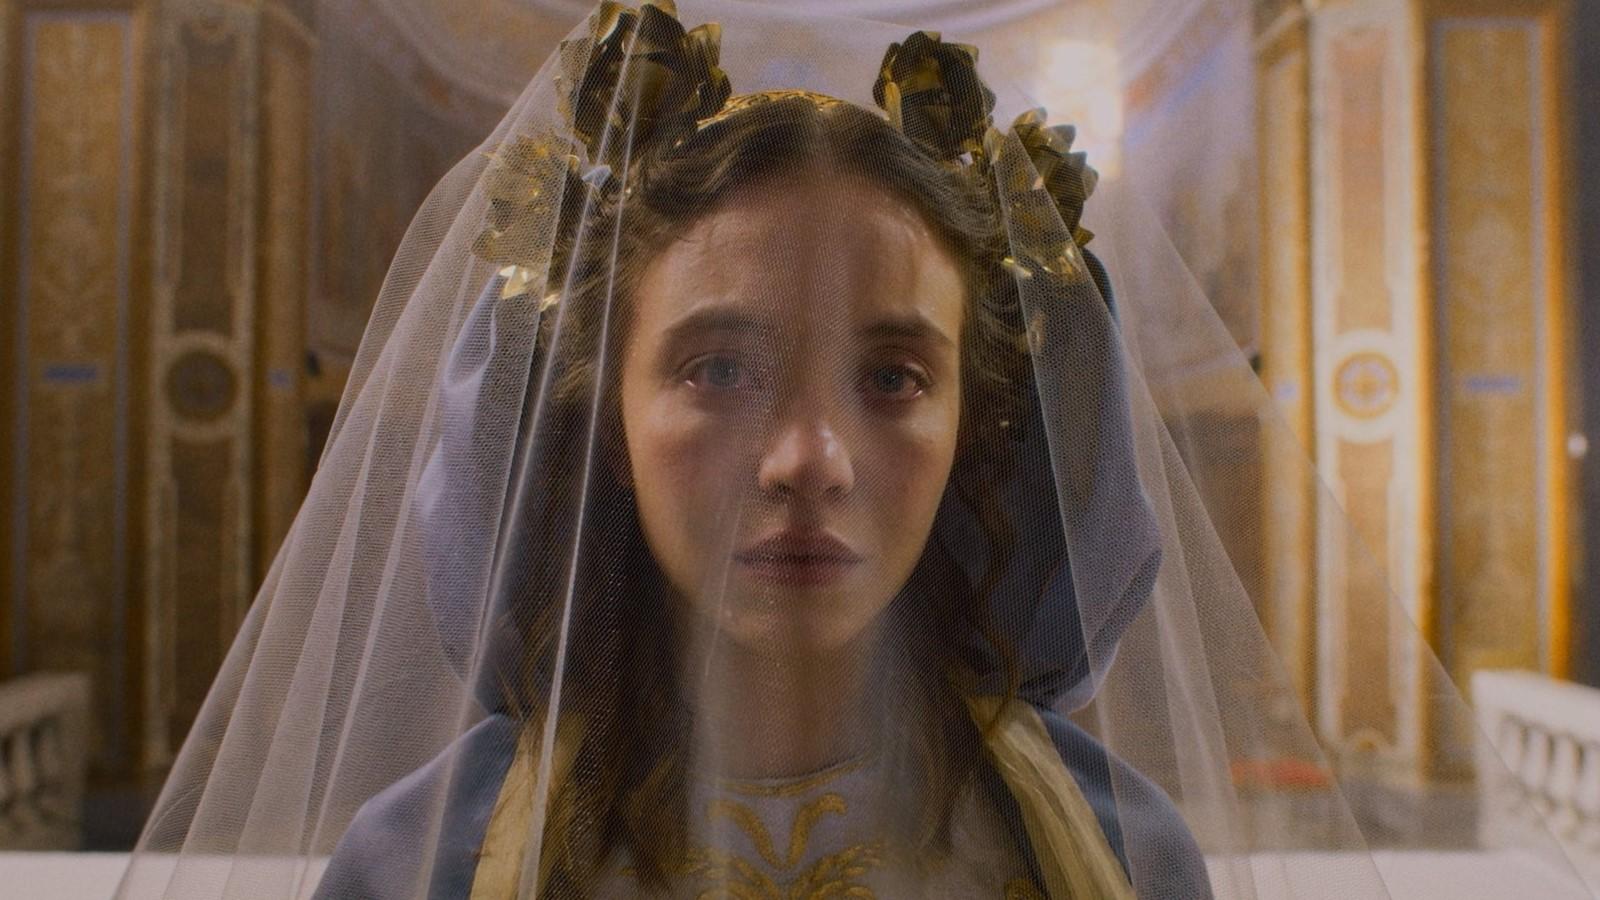 Sydney Sweeney as Sister Cecilia in Immaculate, dressed as the Virgin Mary